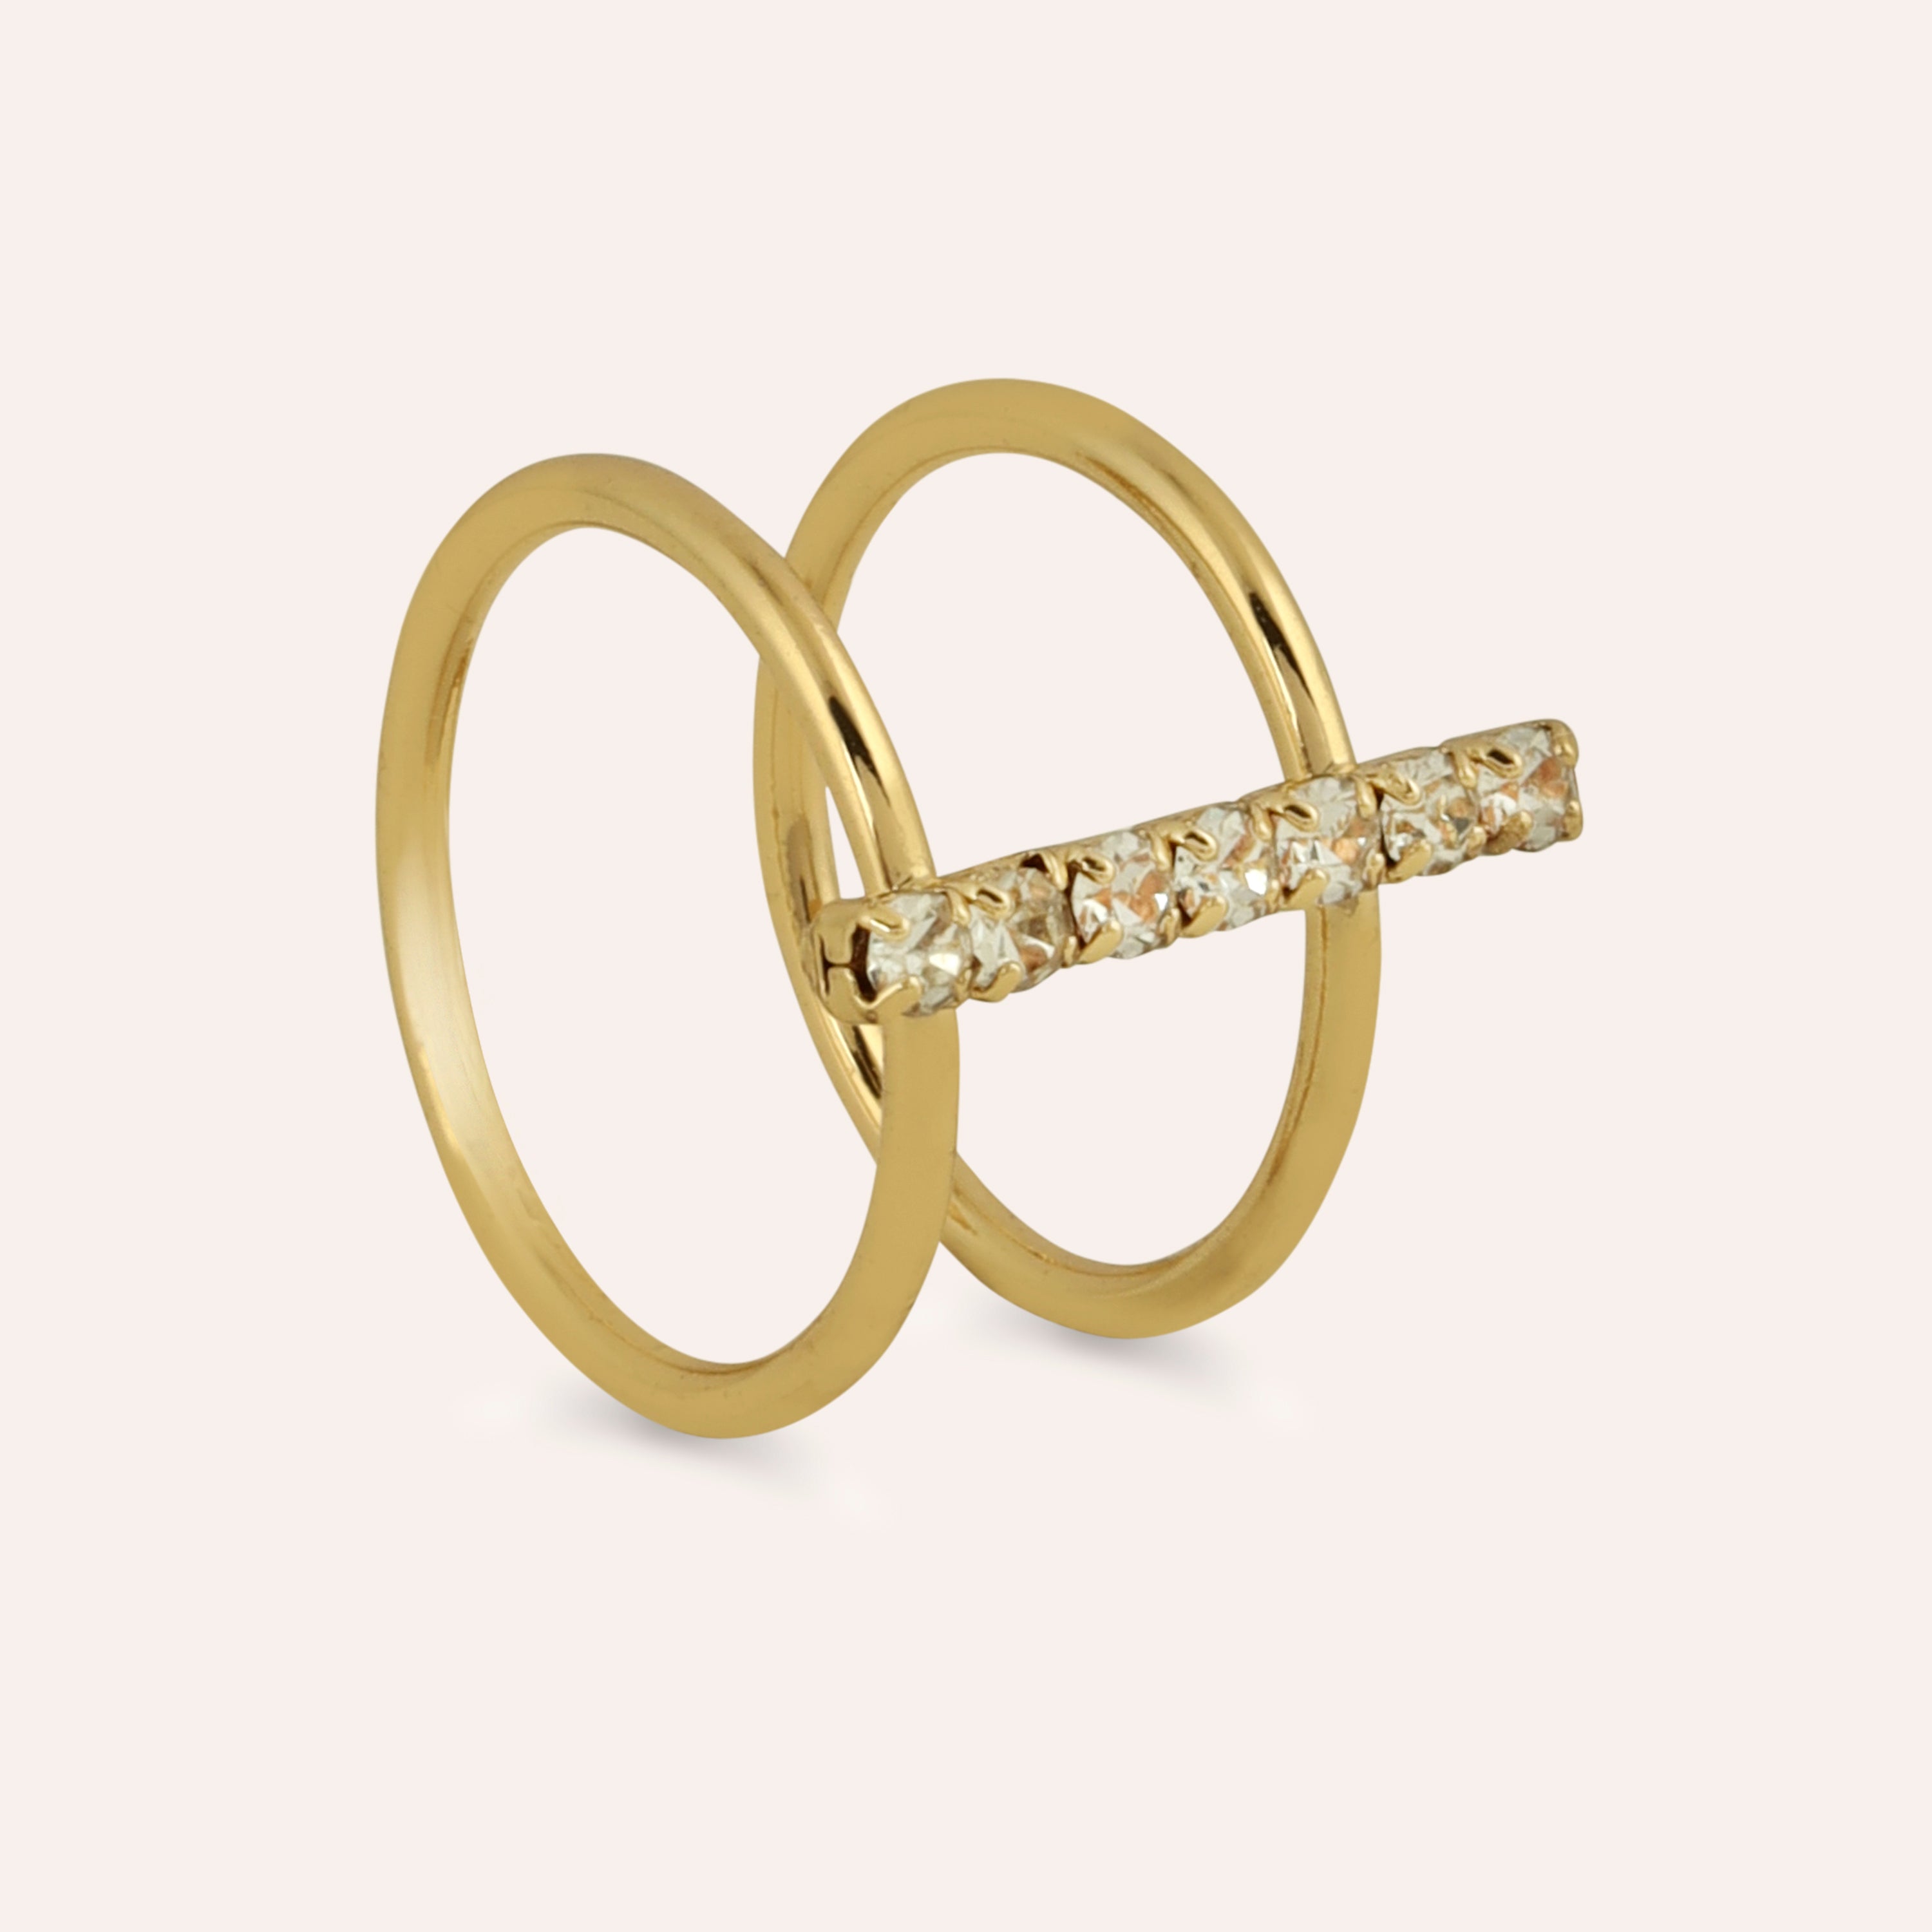 TFC Bloom Bridge Gold Plated Ring- Elevate your style with our exquisite collection of gold-plated adjustable rings for women, including timeless signet rings. Explore cheapest fashion jewellery designs with anti-tarnish properties, all at The Fun Company with a touch of elegance